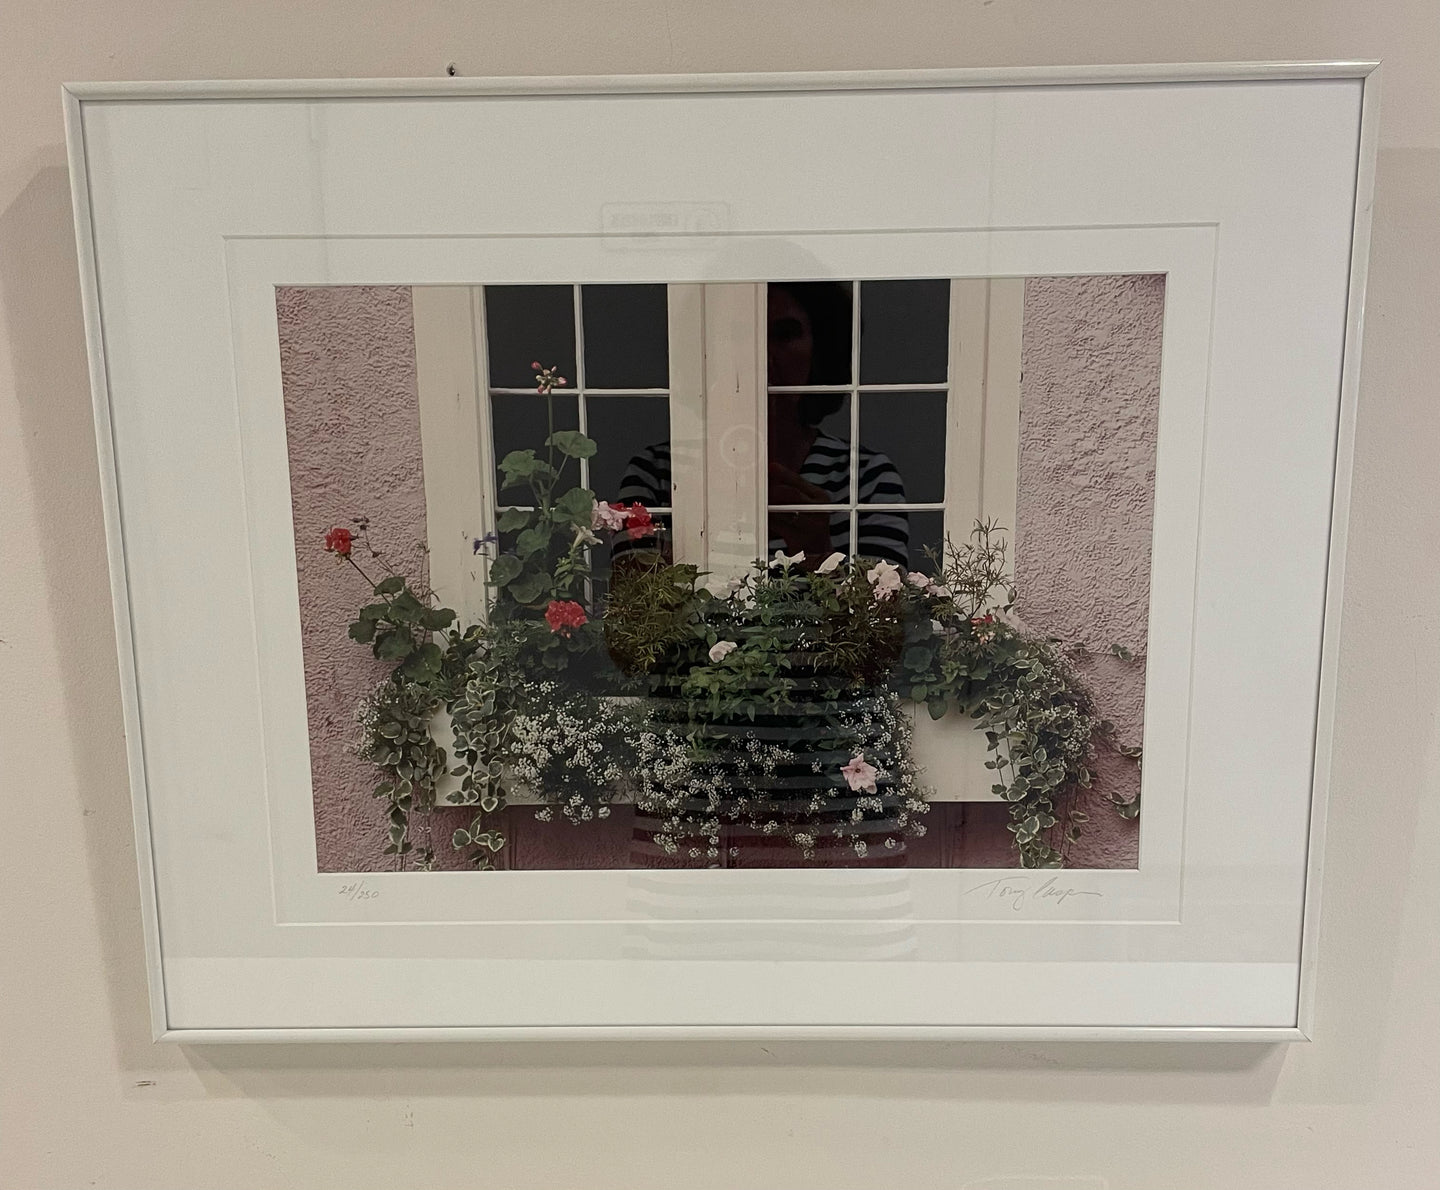 Framed Photograph of Floral Window Box by Tony Casper, signed & numbered